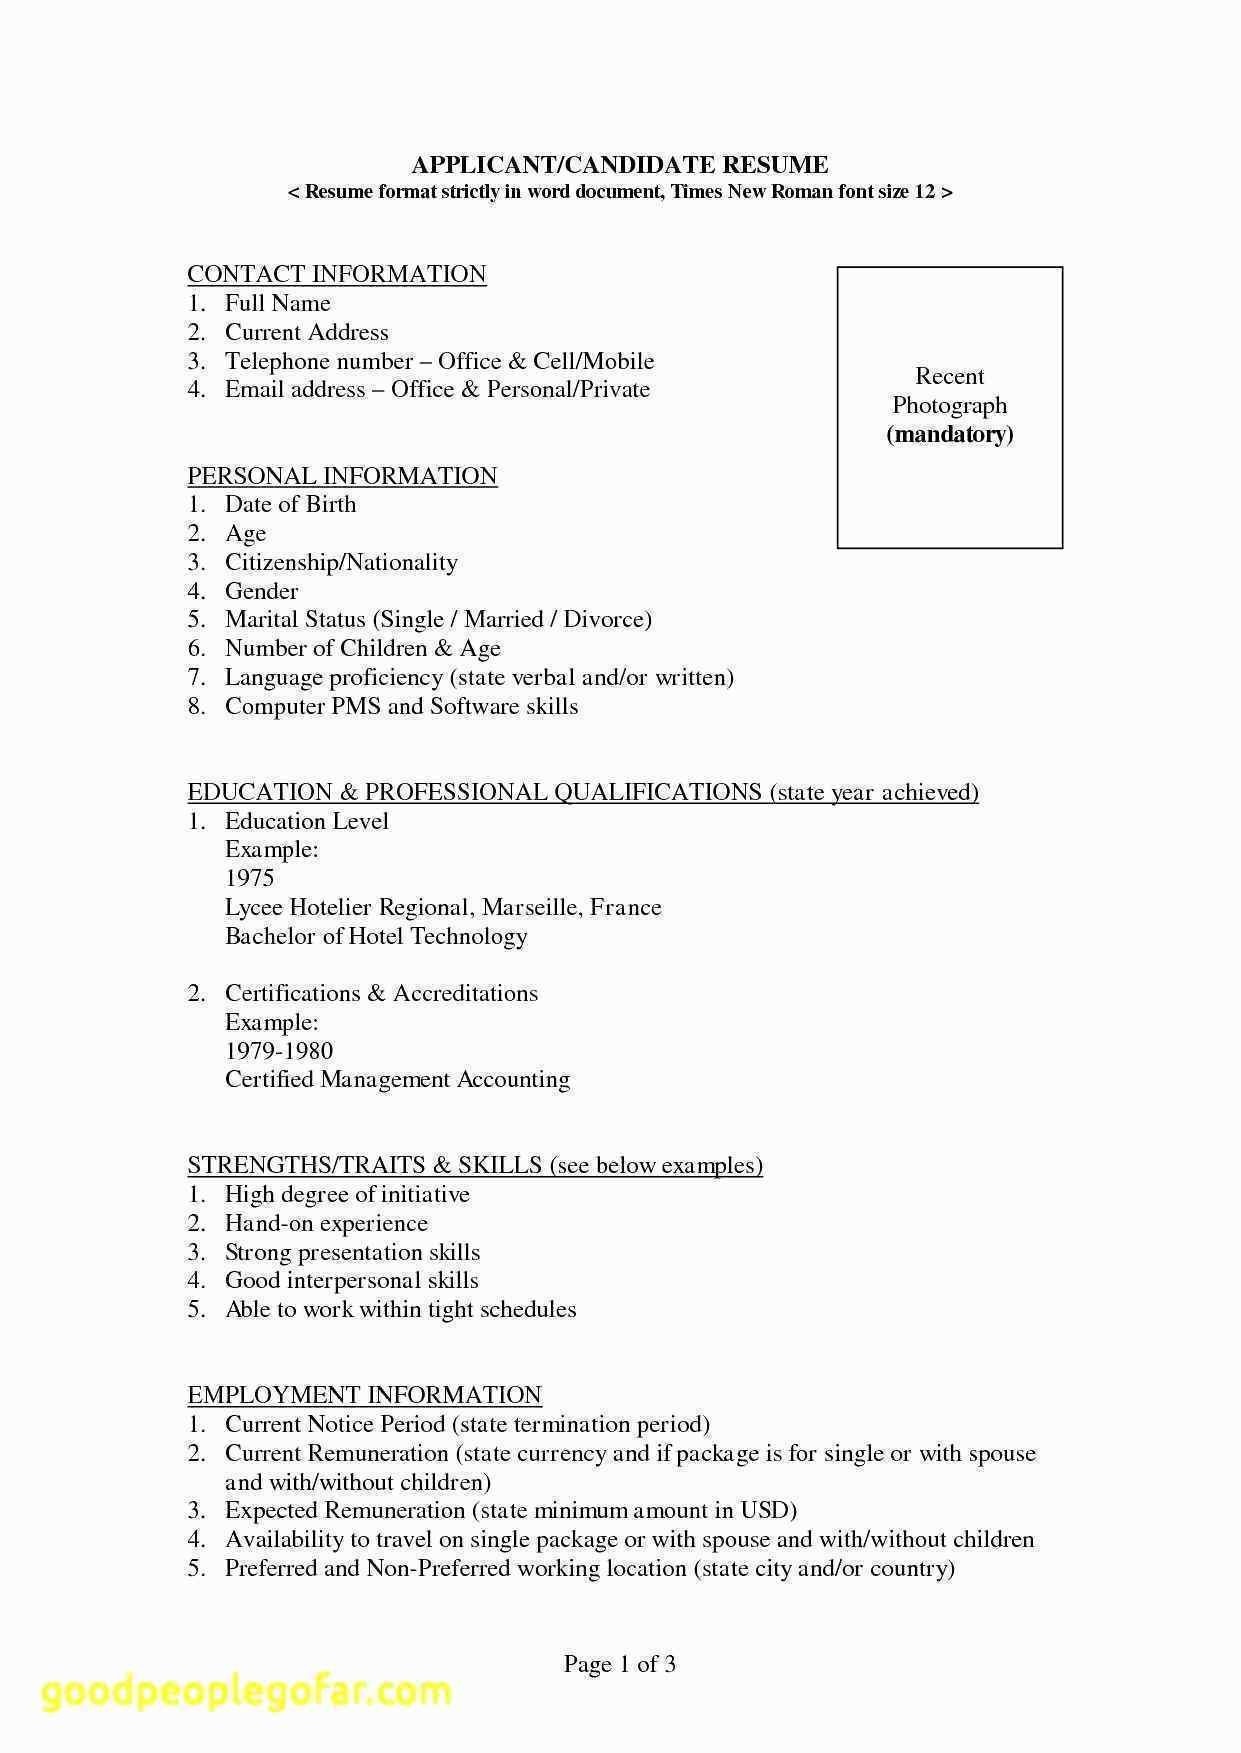 Free Online Resume Builder Printable With Plus Together As Well - Free Online Resume Templates Printable